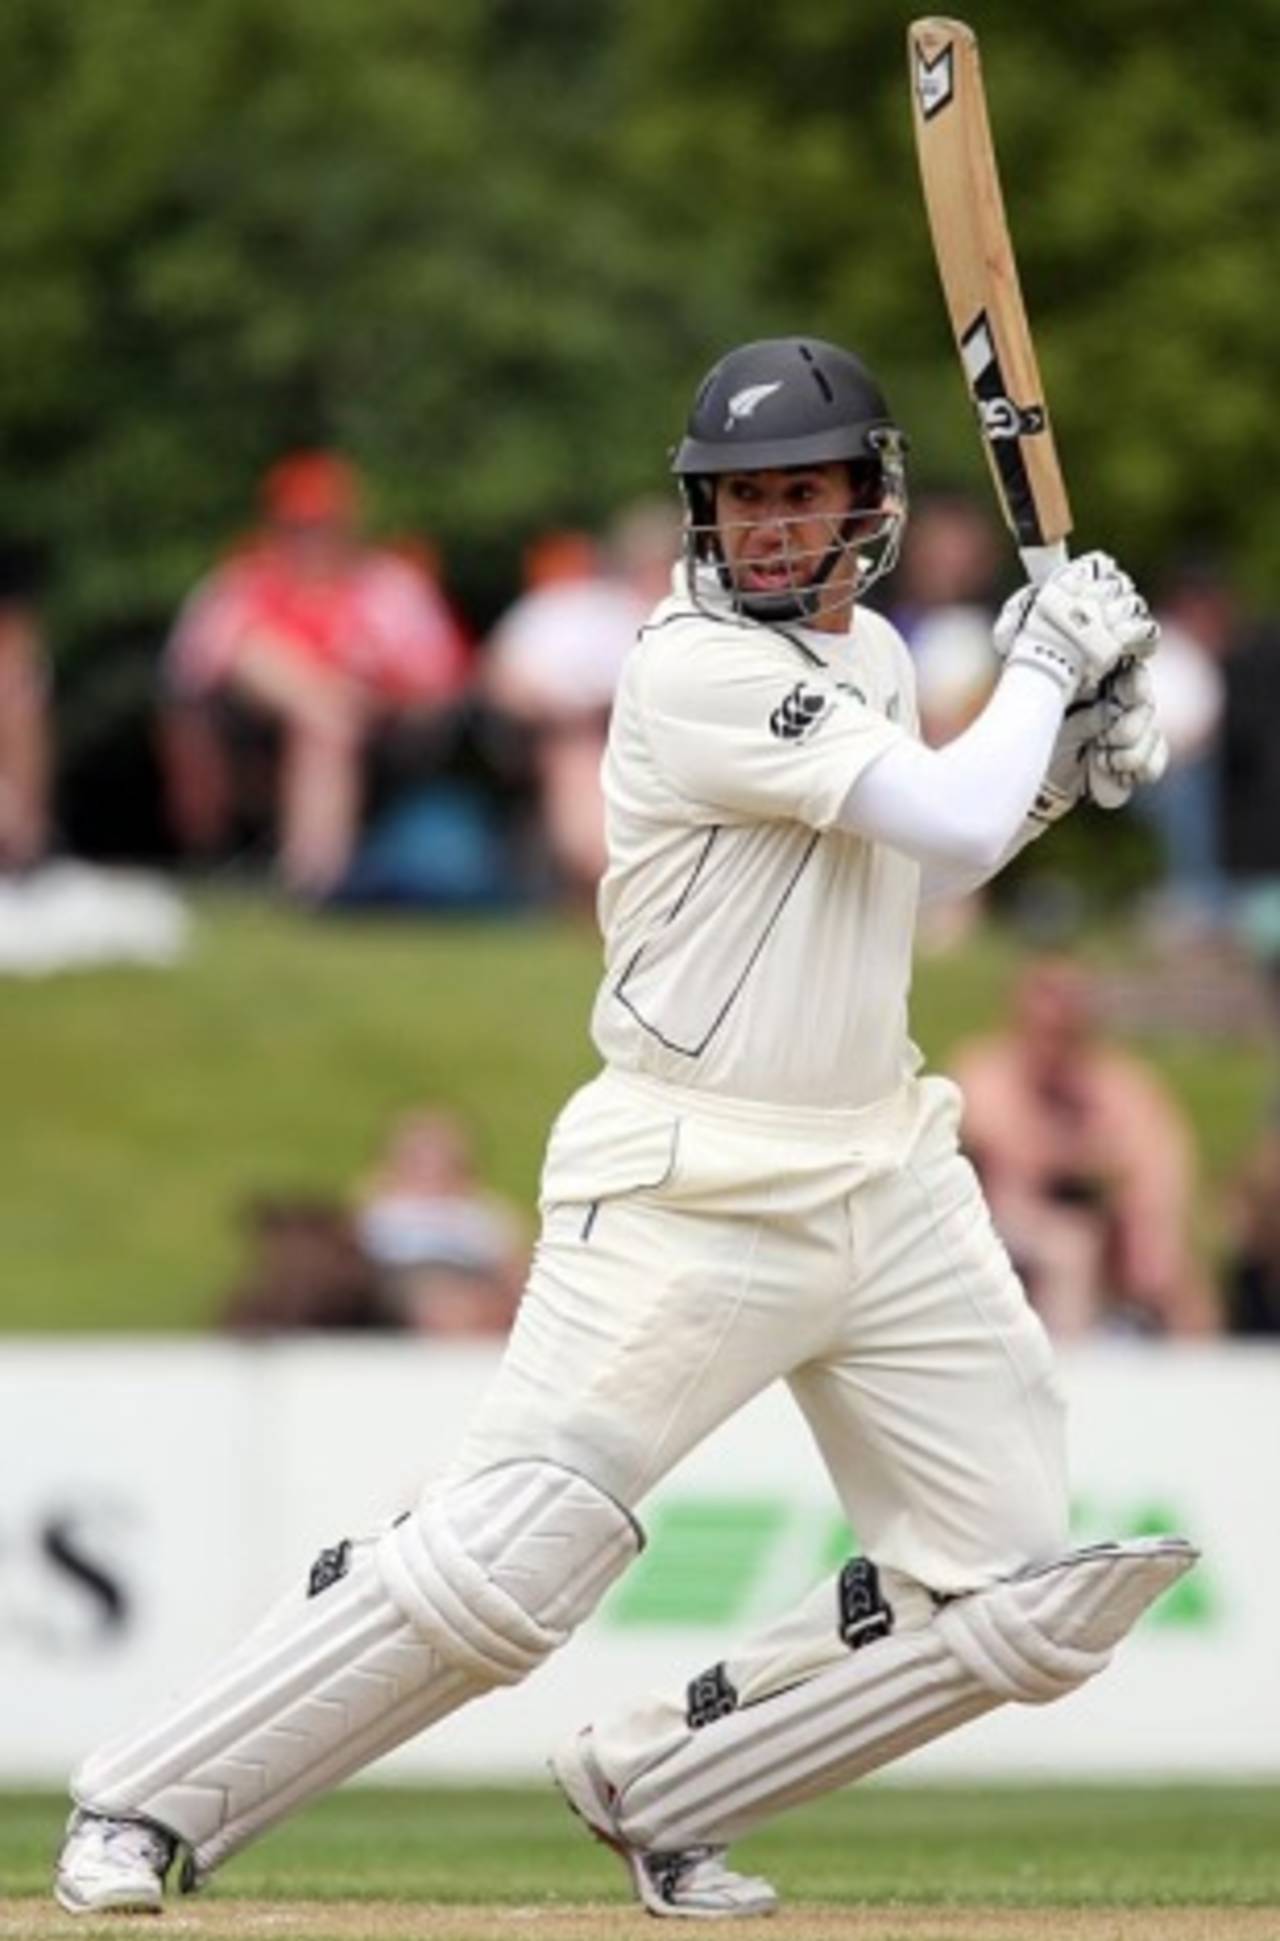 Barring Ross Taylor, there has been little success for the New Zealand top order&nbsp;&nbsp;&bull;&nbsp;&nbsp;Getty Images